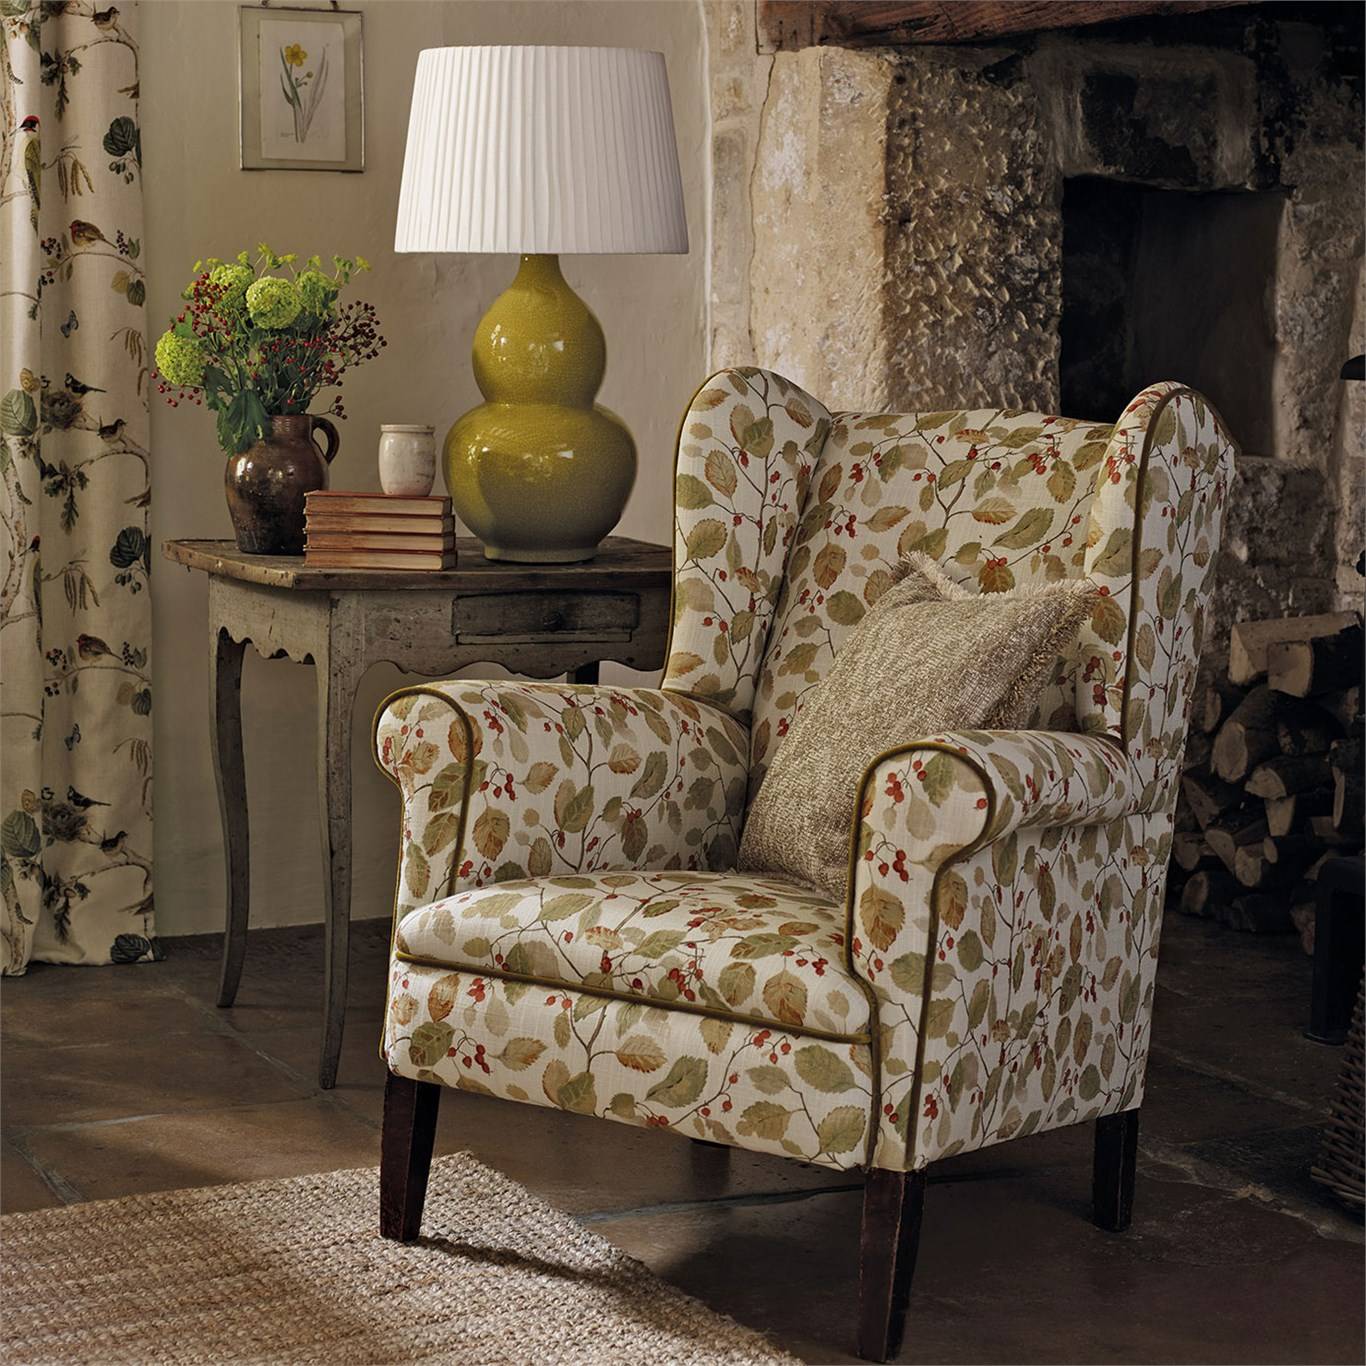 Sanderson Collection Woodland, fabric Berries